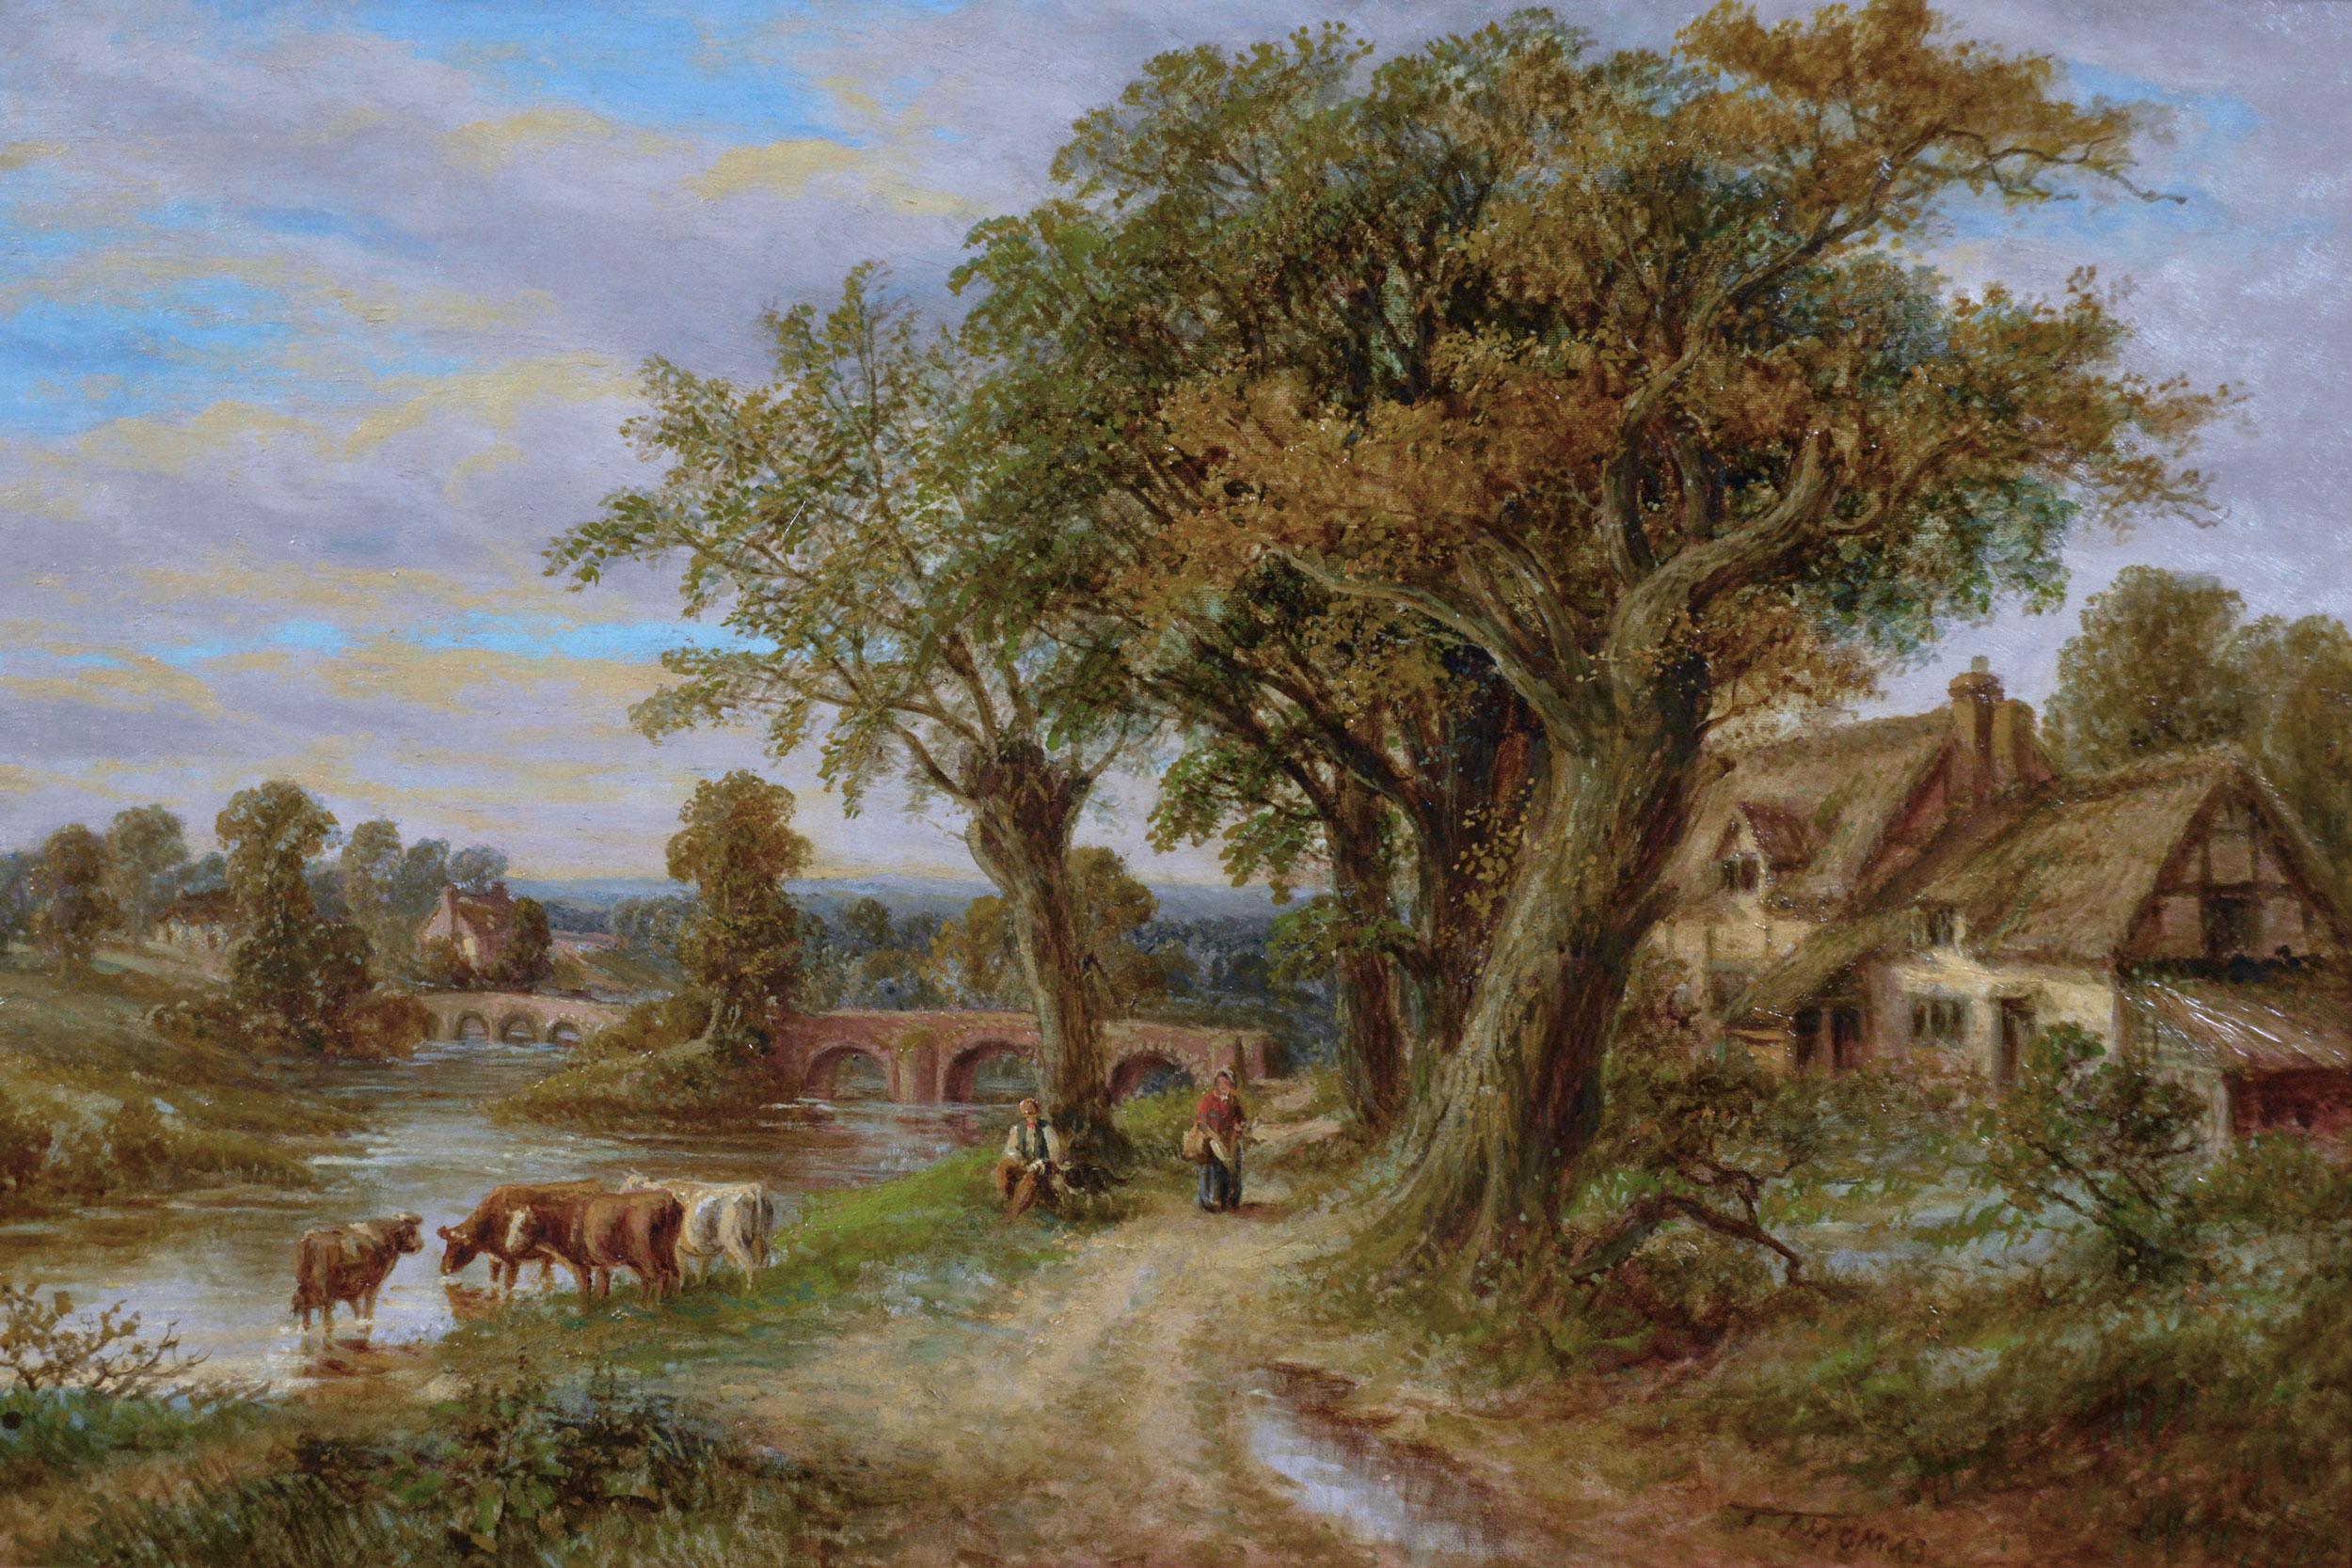 19th Century landscape oil painting of figures with cattle near a country river - Painting by Thomas Thomas